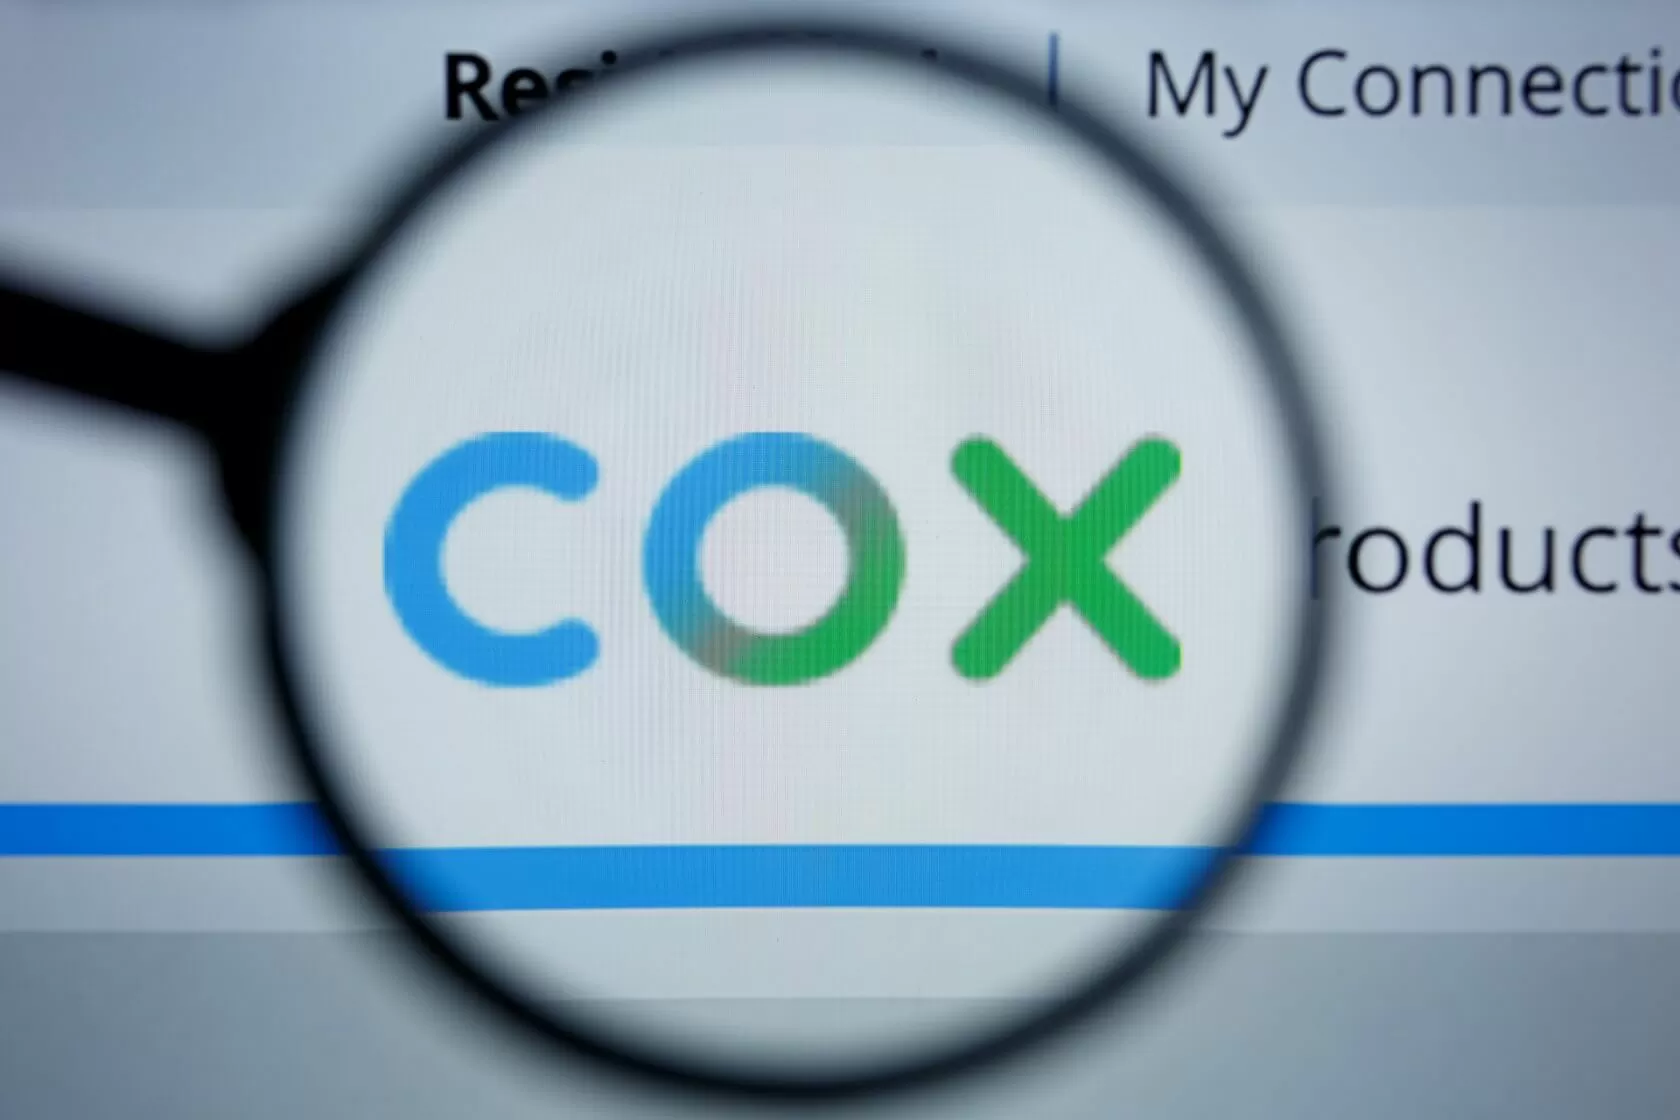 Cox throttles internet upload speeds for entire neighborhoods to deal with data hogs